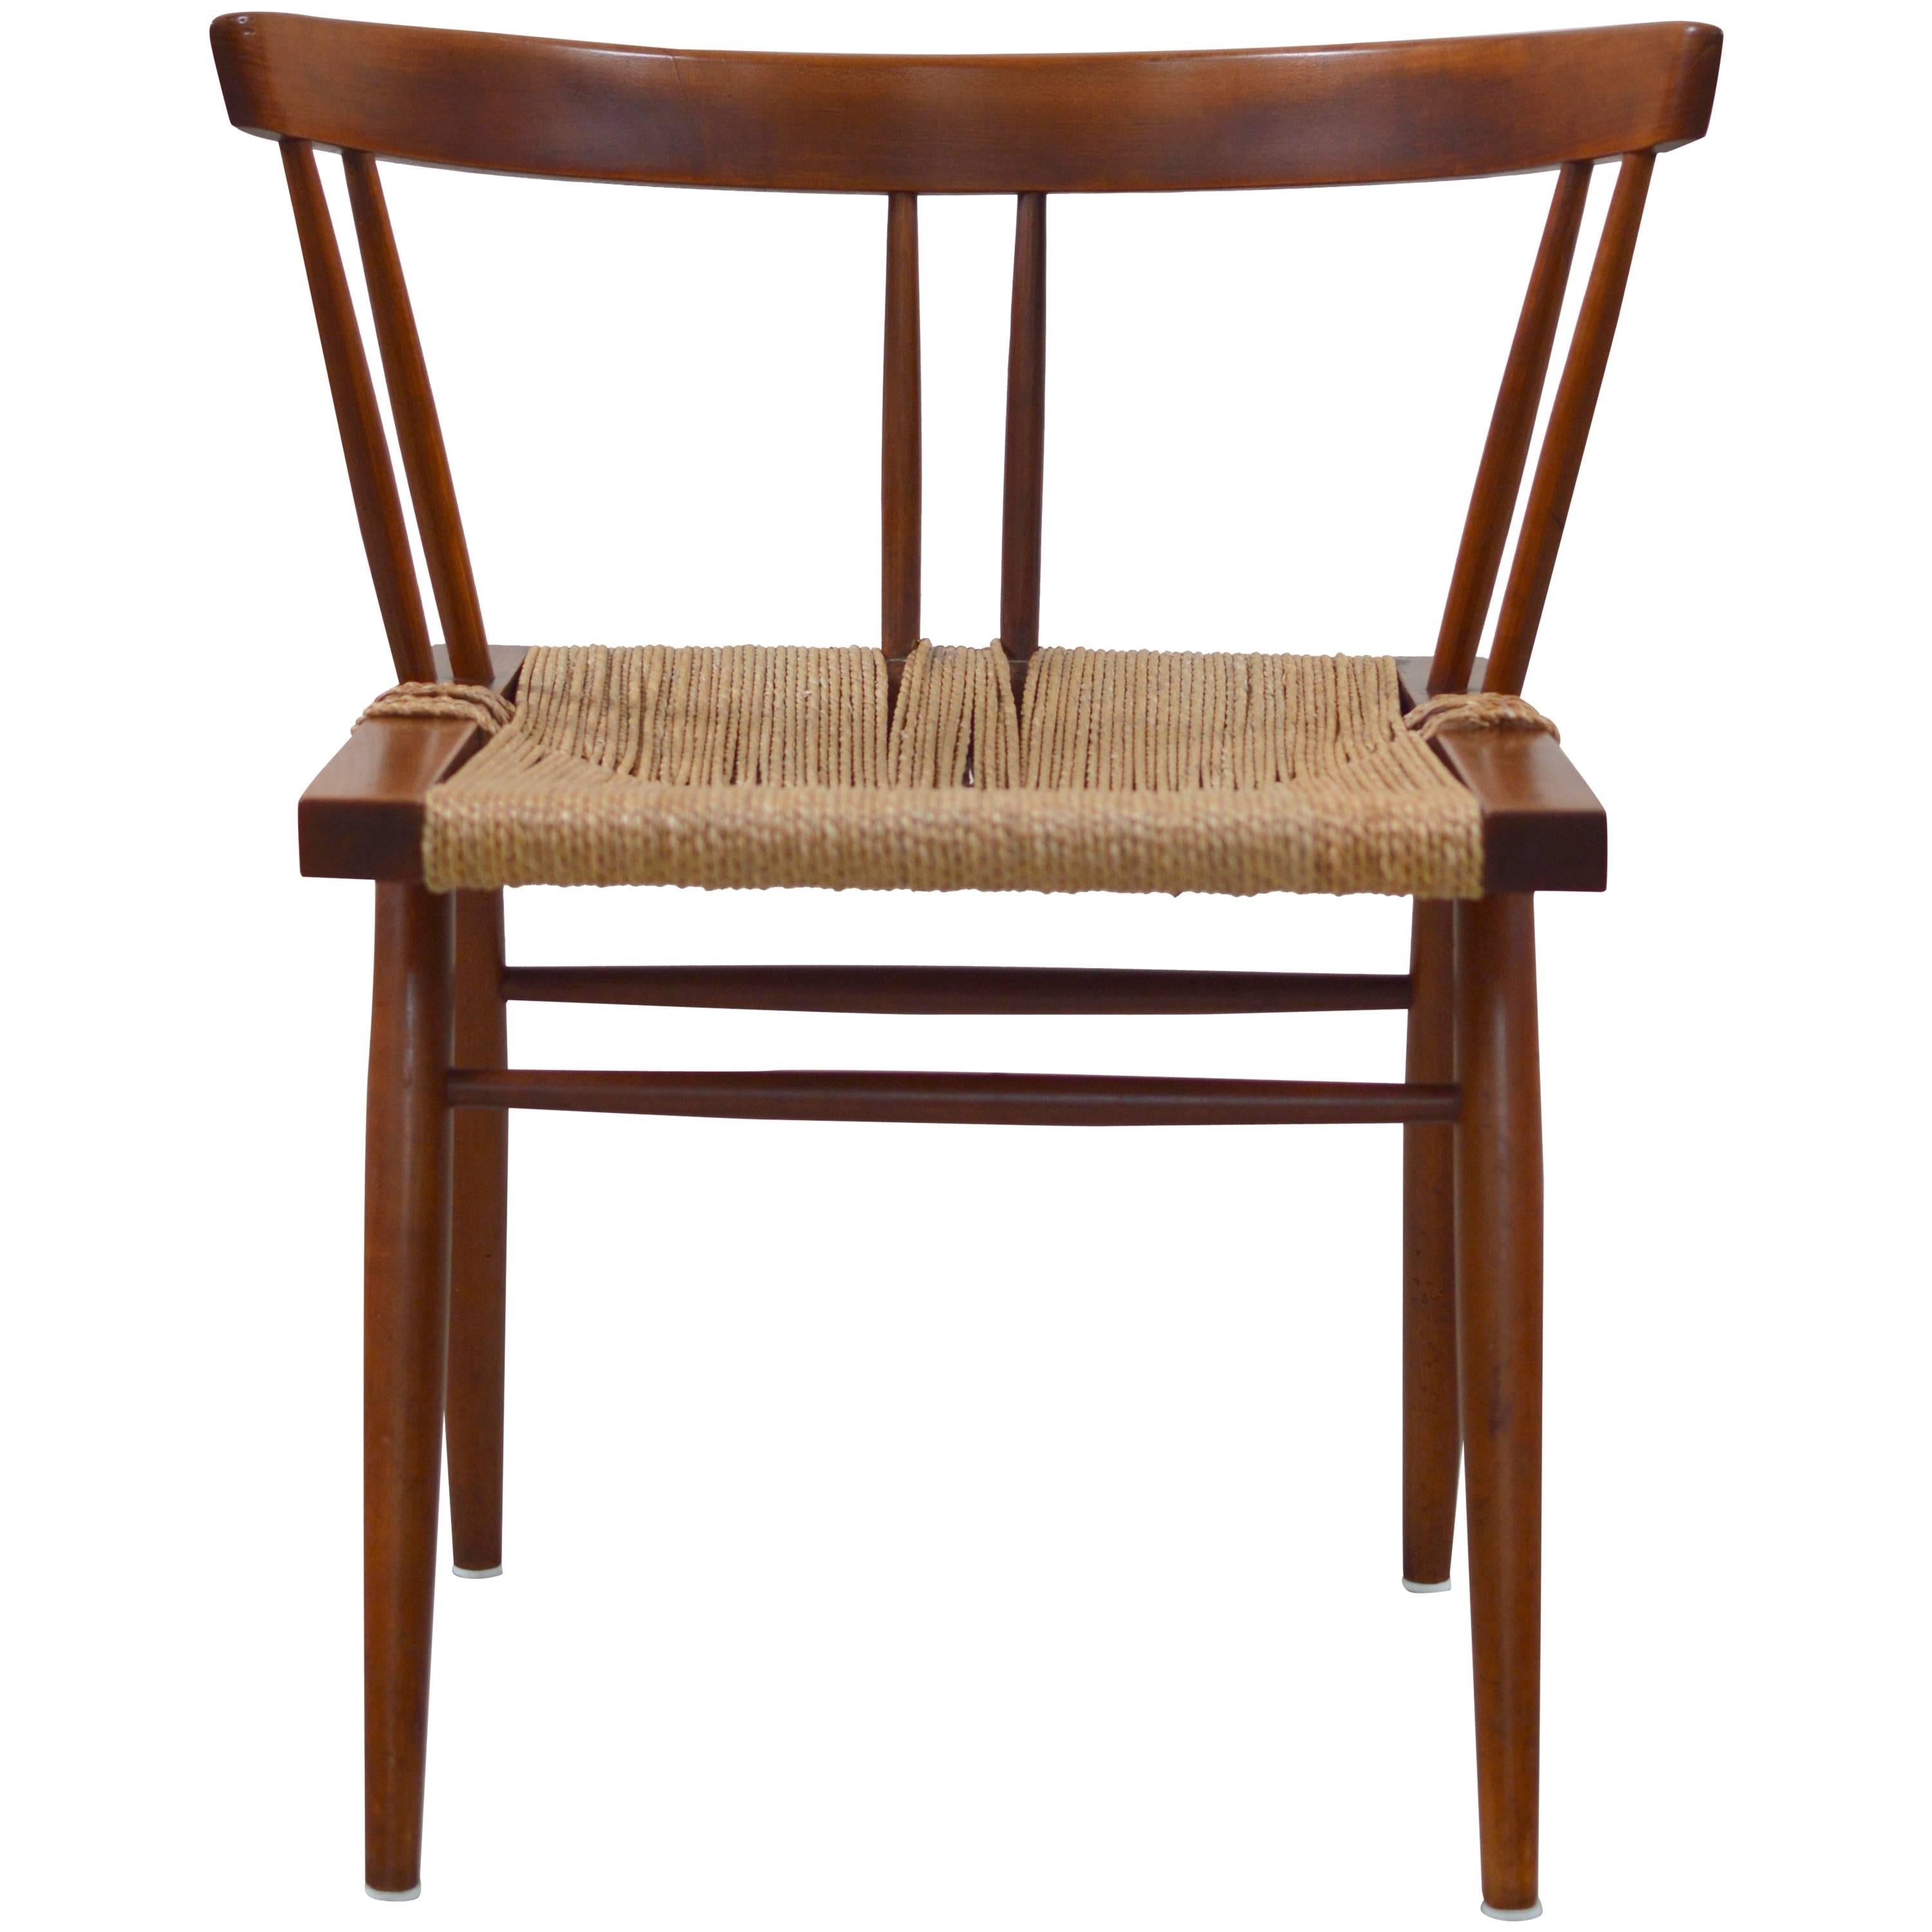 Grass Seat Chair by George Nakashima